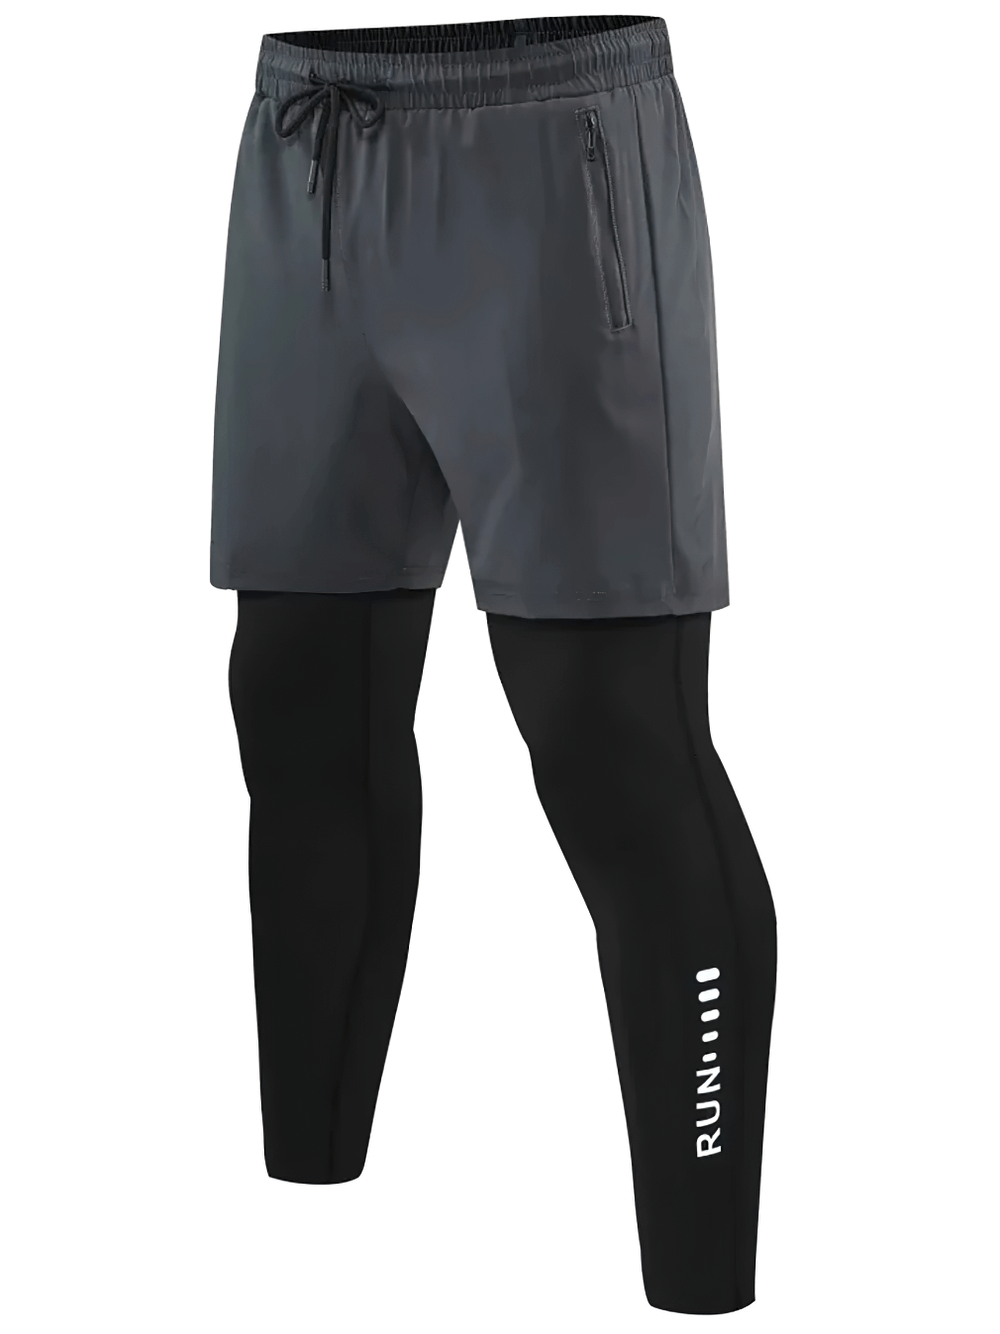 Athletic 2-in-1 Shorts and Tights for Performance - SF2129